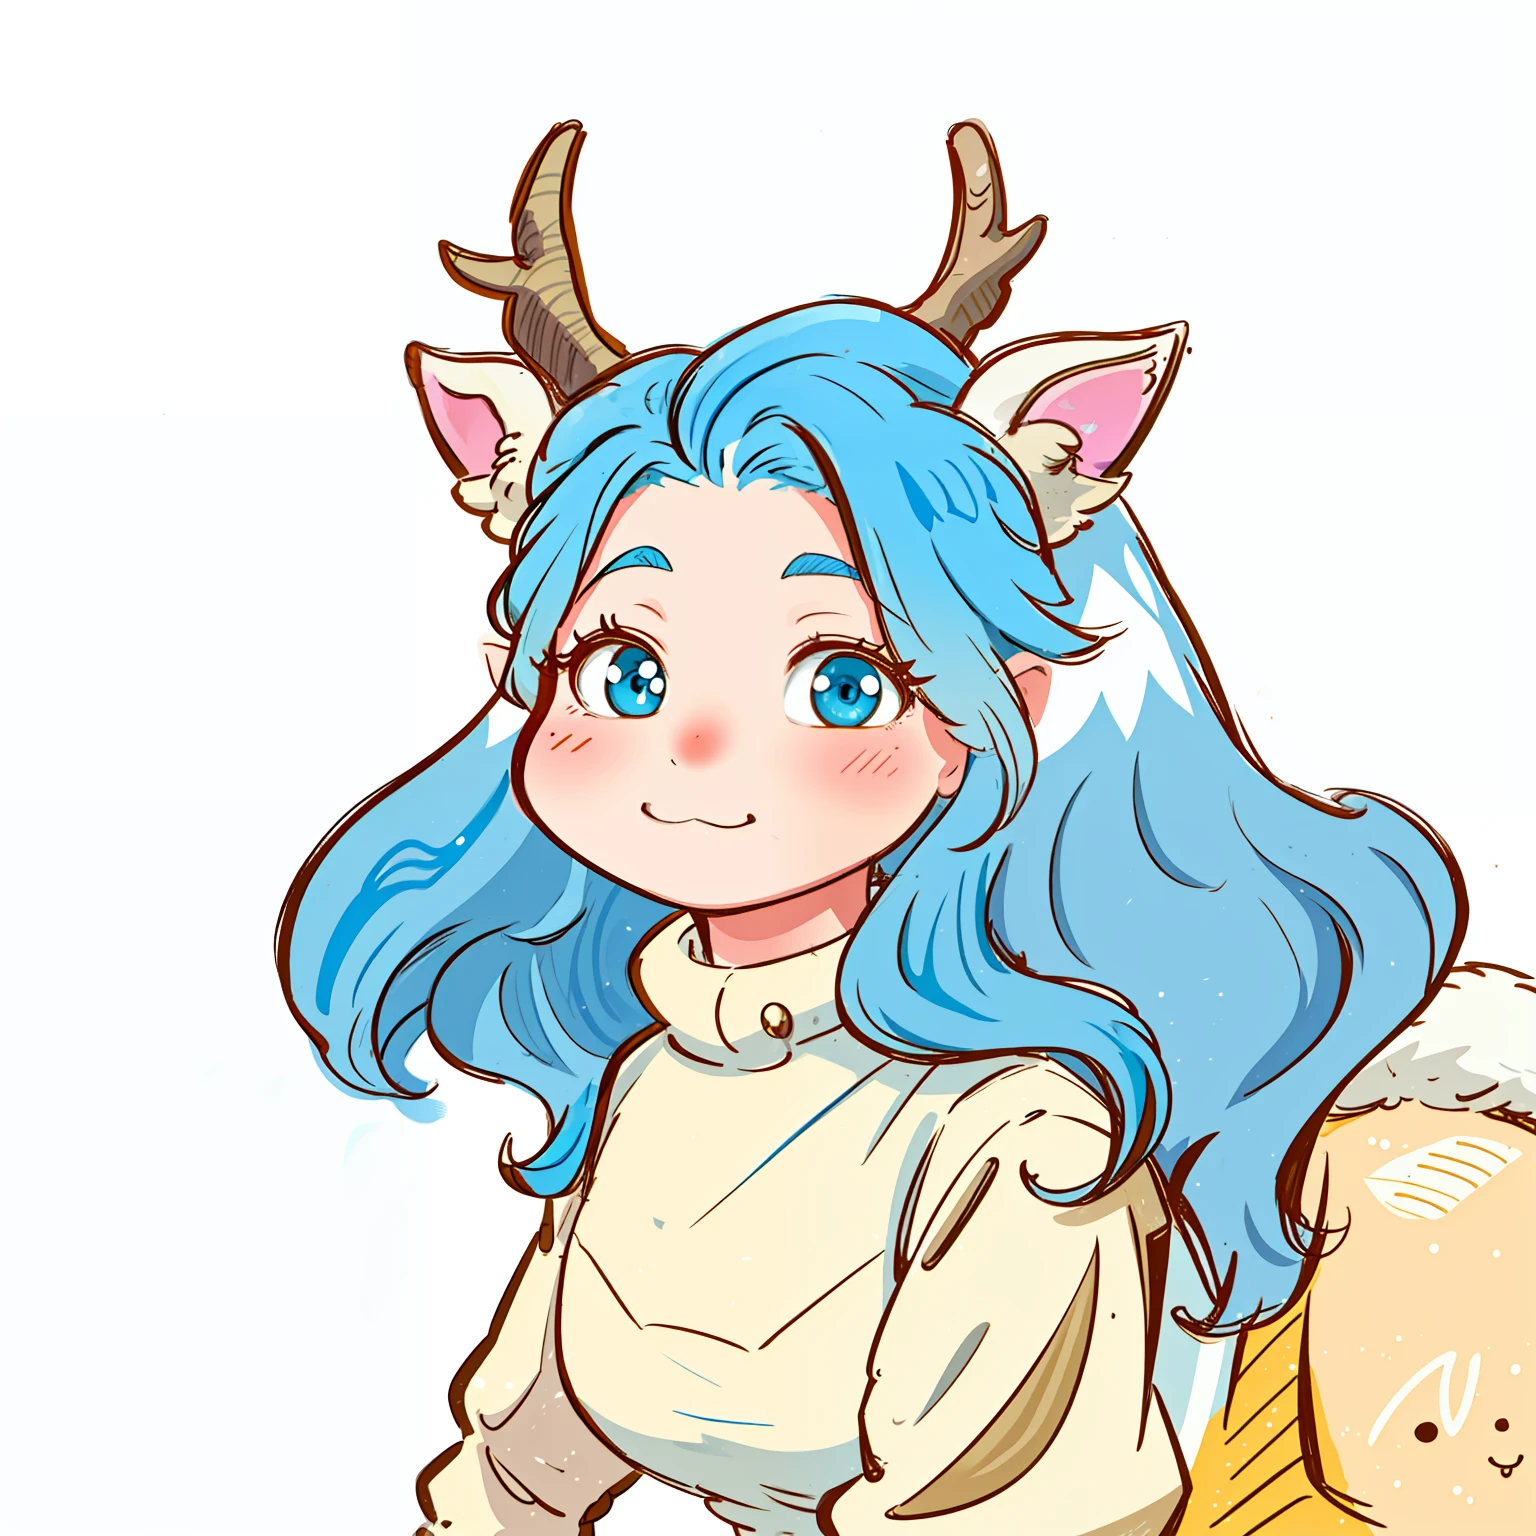 Cartoon of a pony with blue hair and blue mane, anthropomorphic female deer, anthropomorphic deer female, an anthropomorphic deer, anthropomorphic deer, antlers on her head, colored sketch, girl design lush horns, cute forest creature, cute horns, With horns, a mythical creature, deer ear, line art in colour